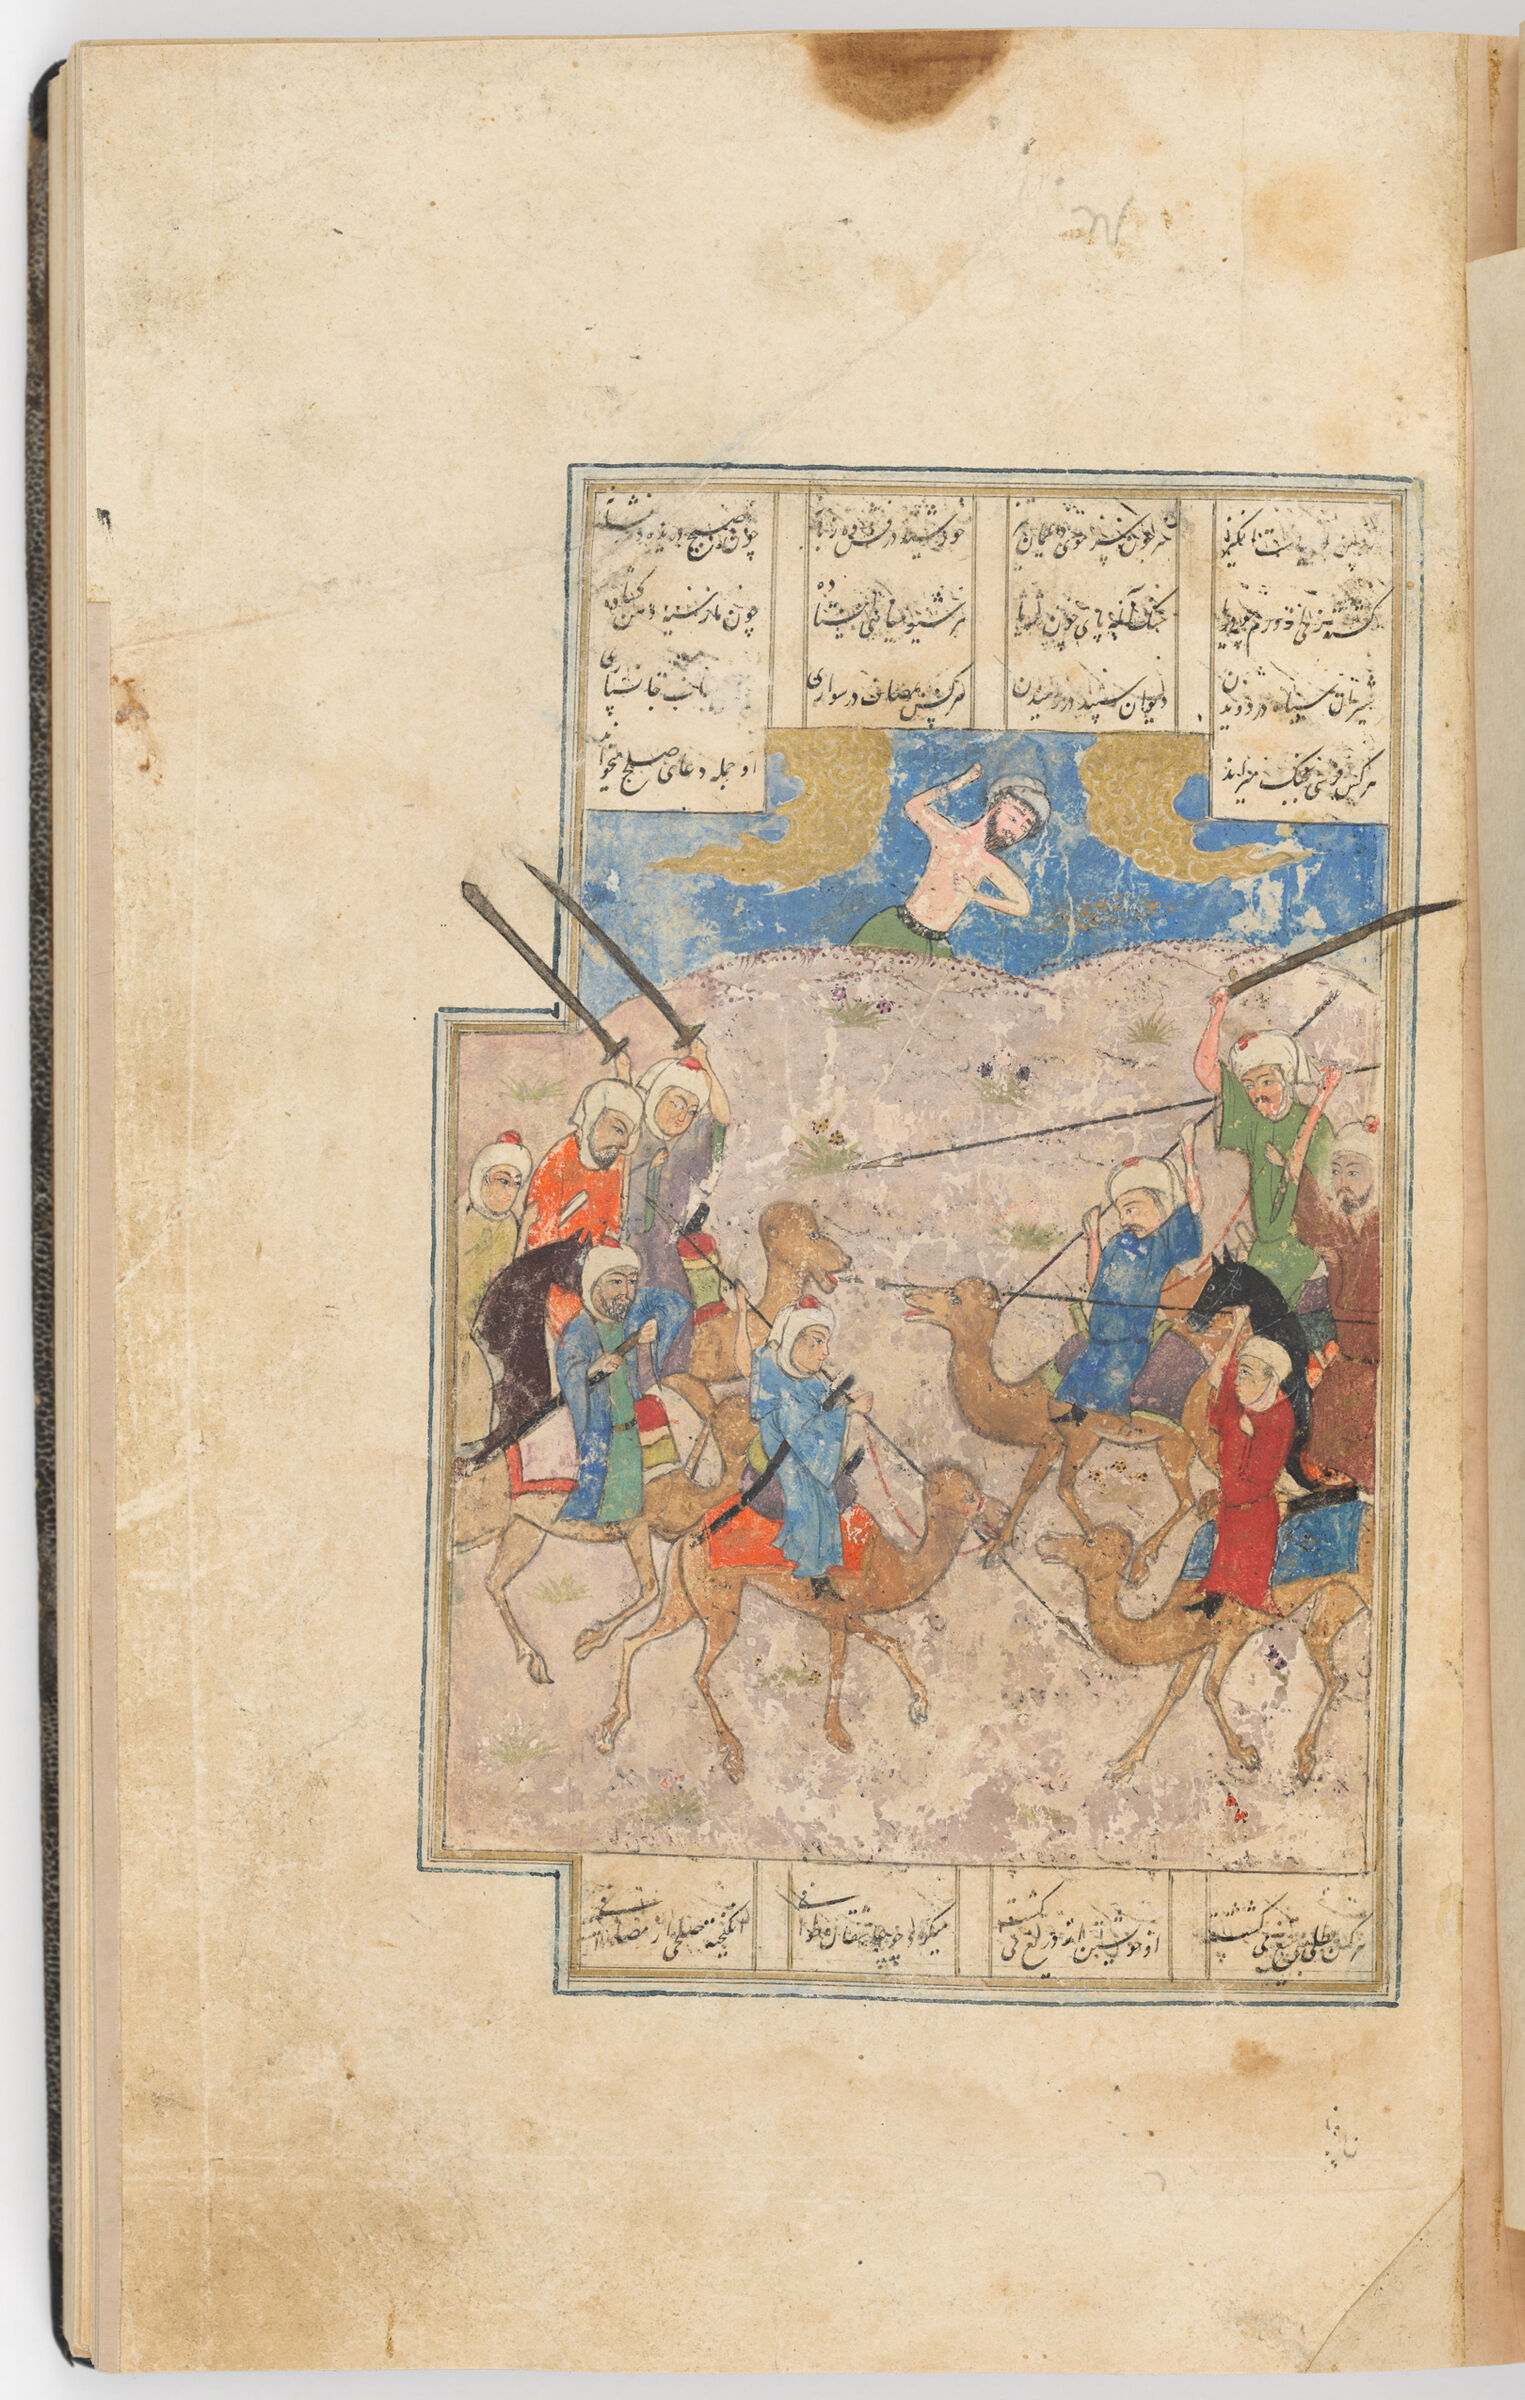 Majnun Watches The Battle Of The Clans (Text Verso; Painting Recto Of Folio 161), Painting From A Manuscript Of The Khamsa By Nizami